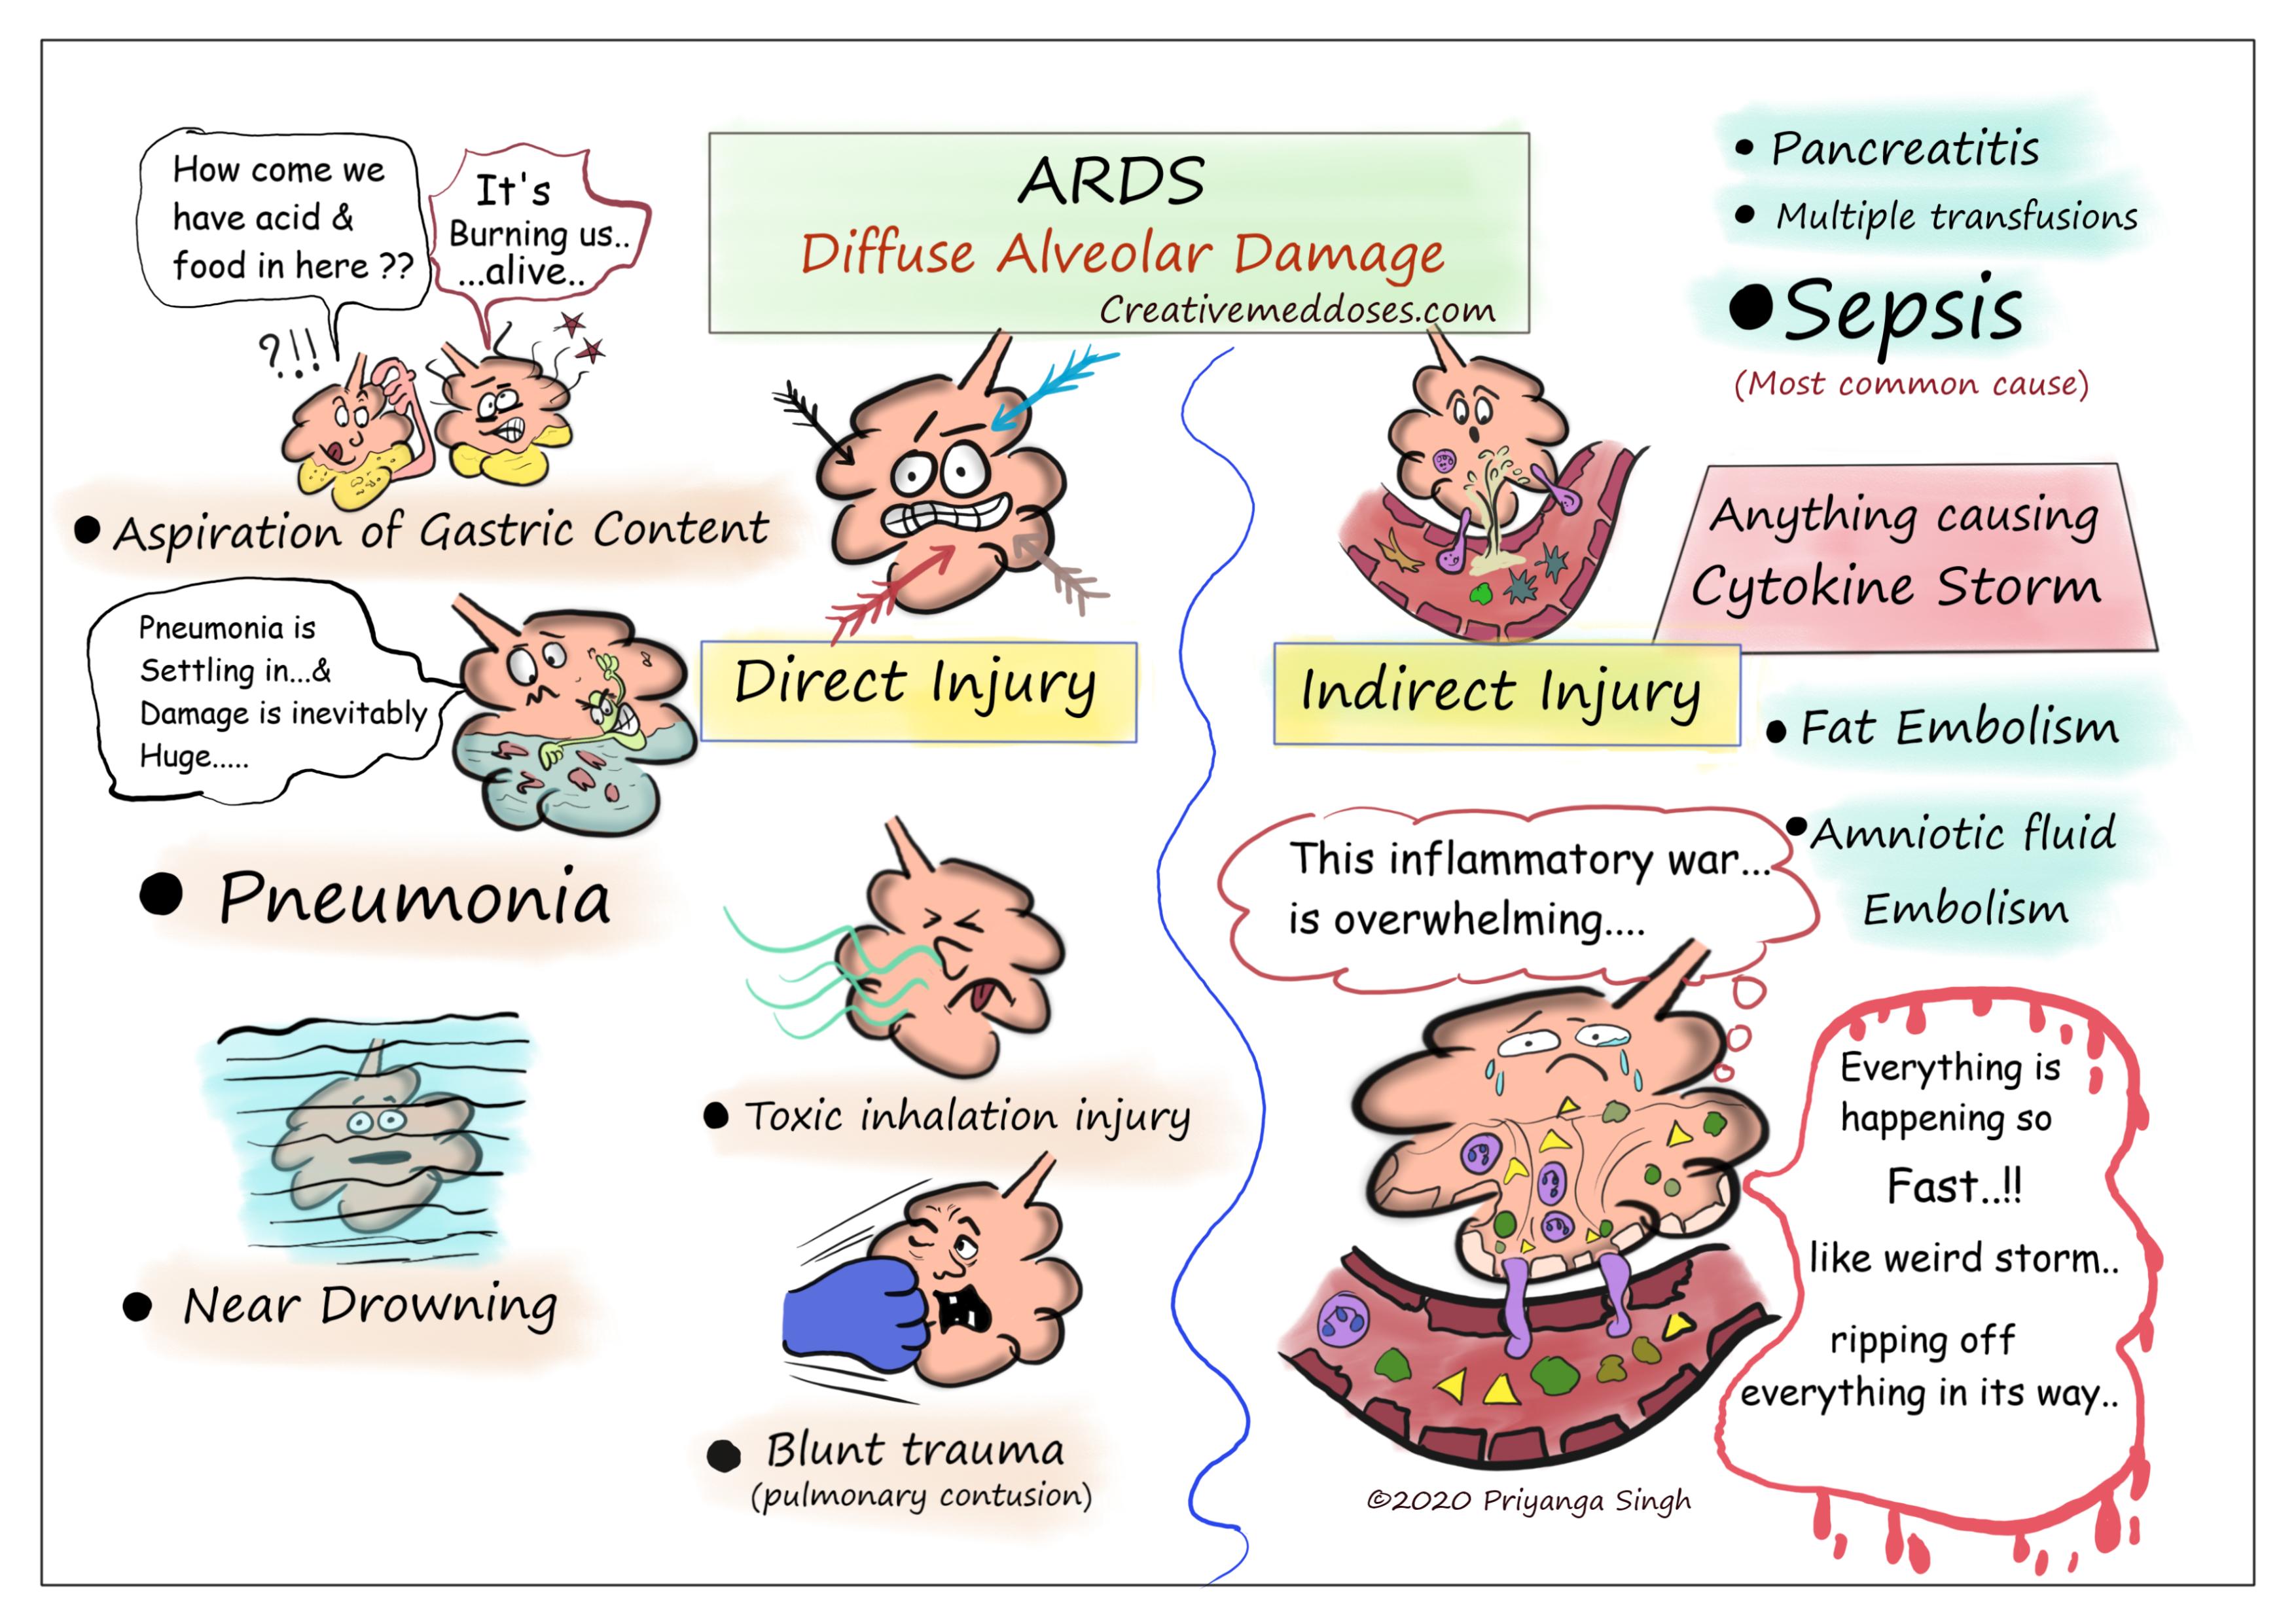 Acute Respiratory Distress Syndrome (Ards) - Creative Med Doses